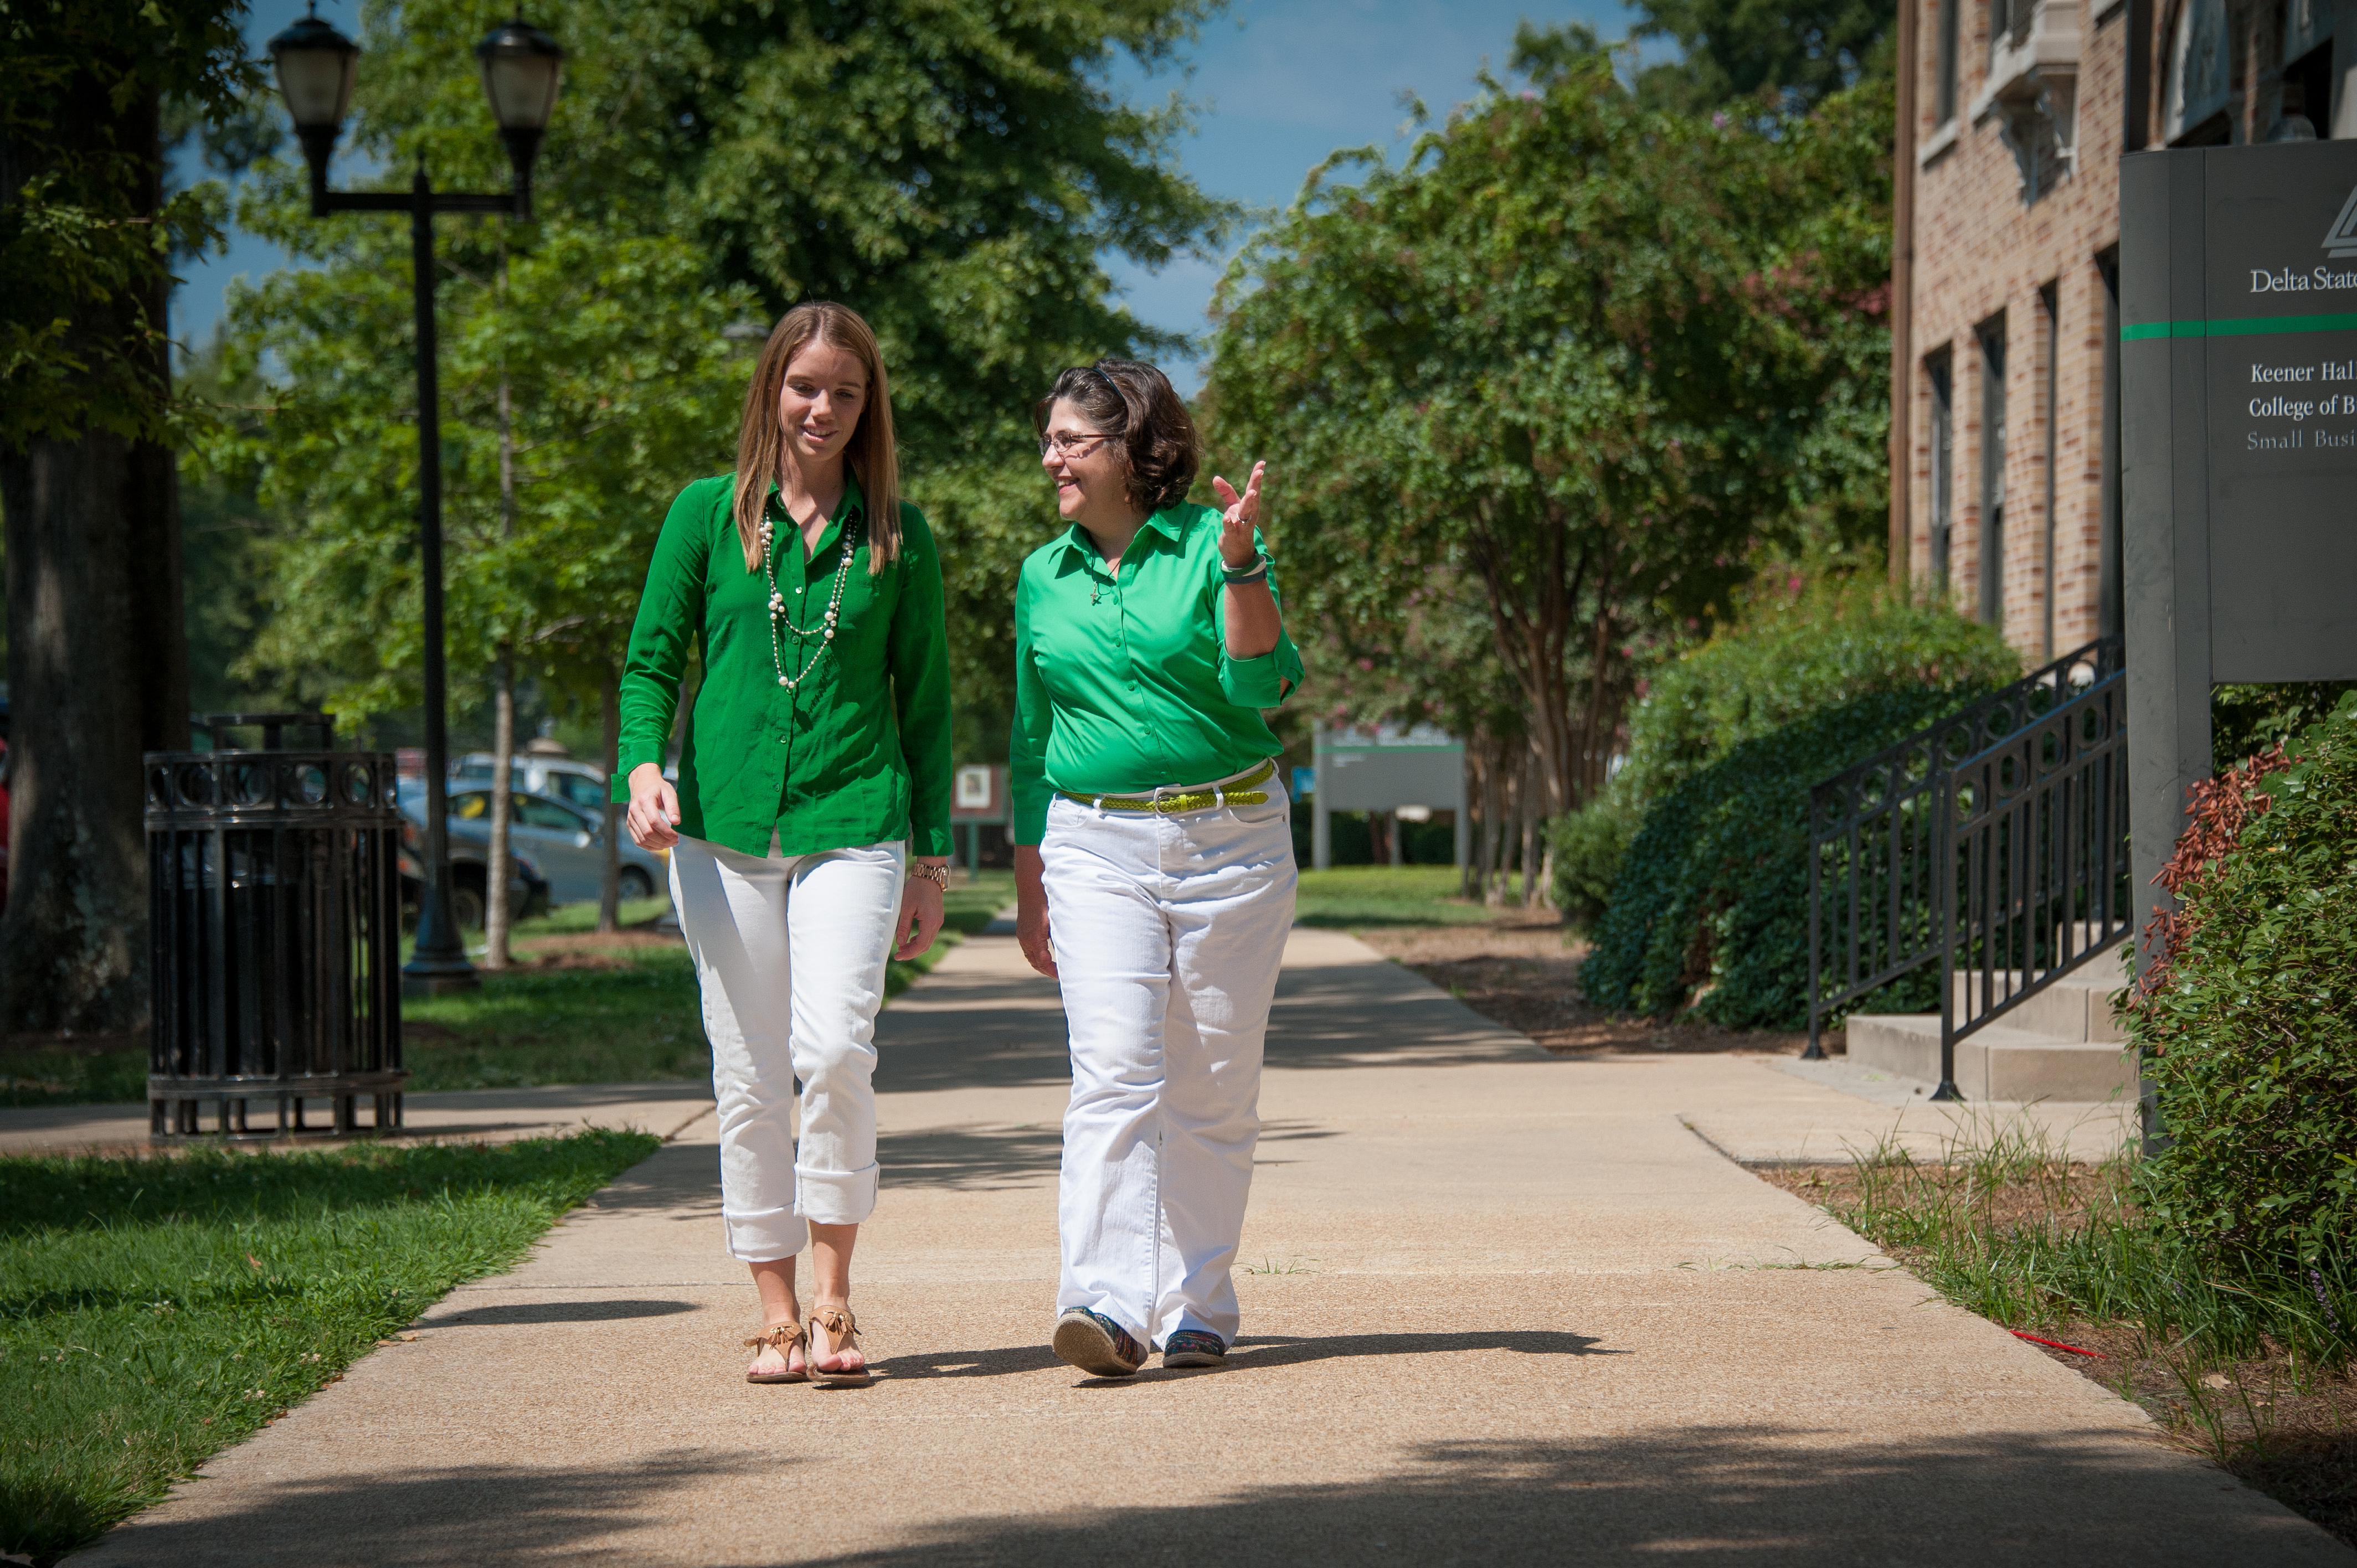 Senior Student Government Association President Sydney Hodnett and Anne Weissinger ‘81, president of the Delta State University Foundation Board, are both from Rolling Fork and play leading roles at Delta State.